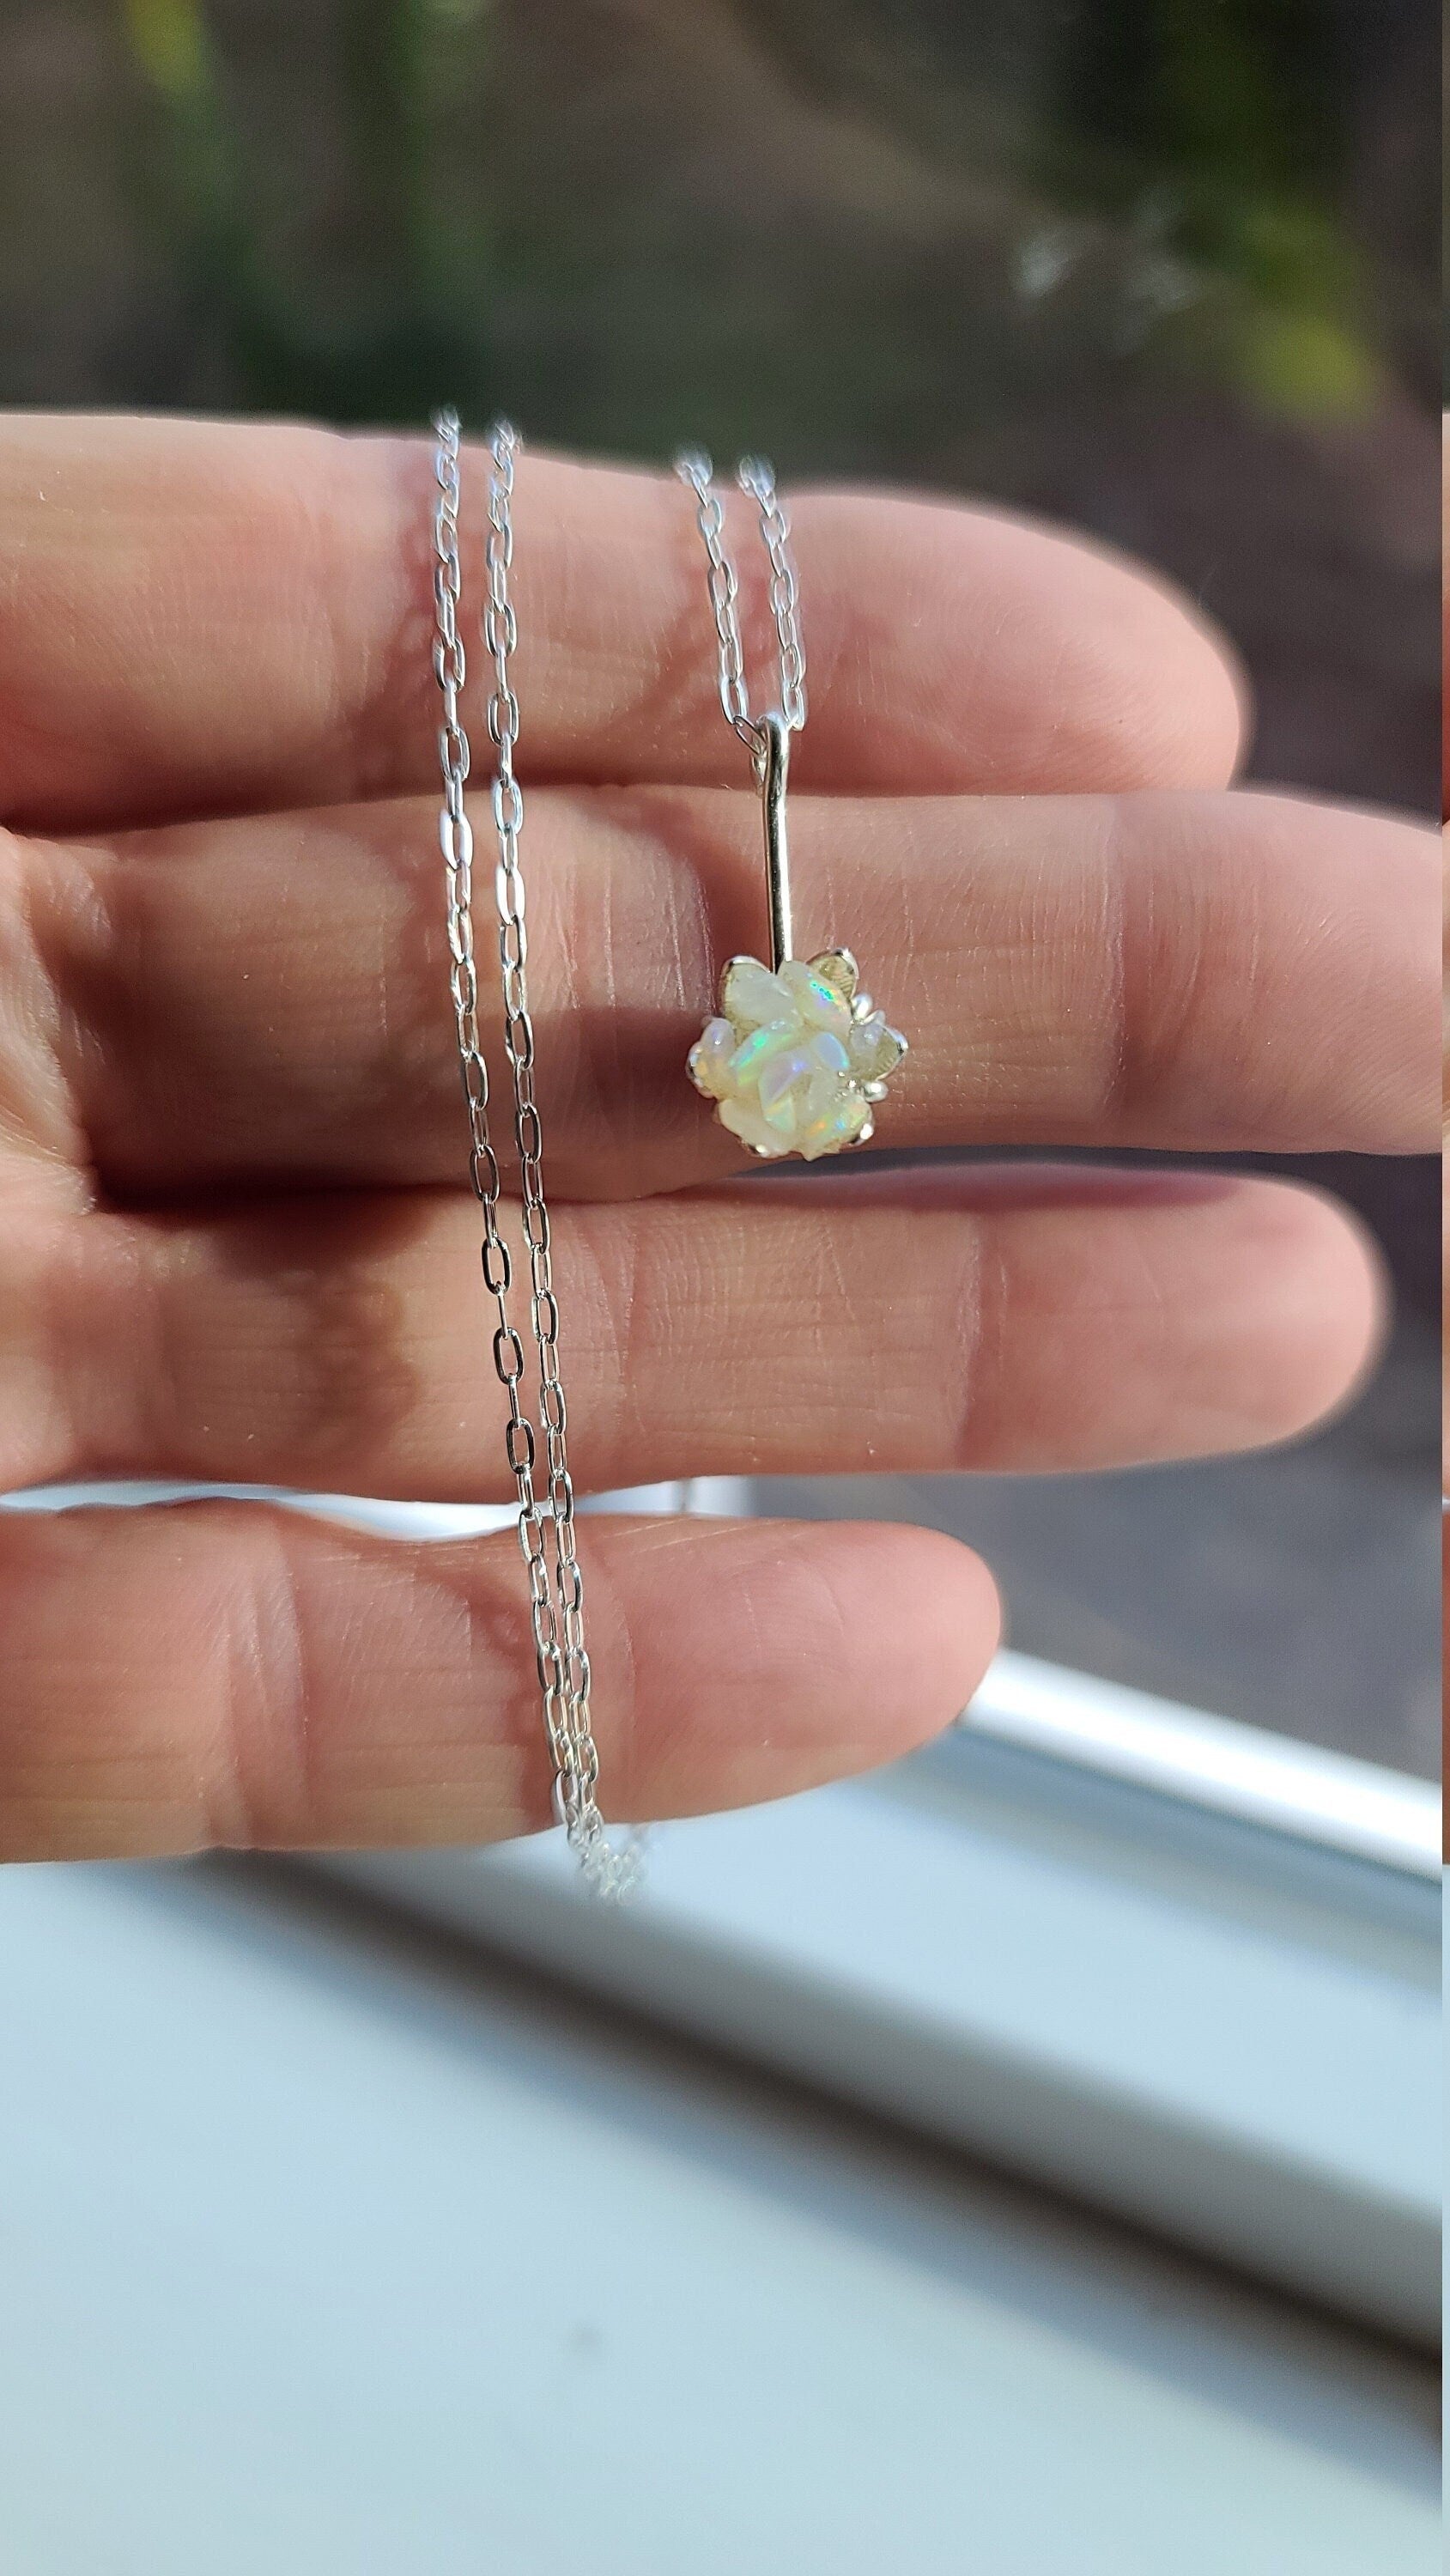 Fire Opal Lotus Flower Pendant Necklace, Rough White Gemstone Floral Jewelry for Women, Unique October Birthstone Jewelry for Her